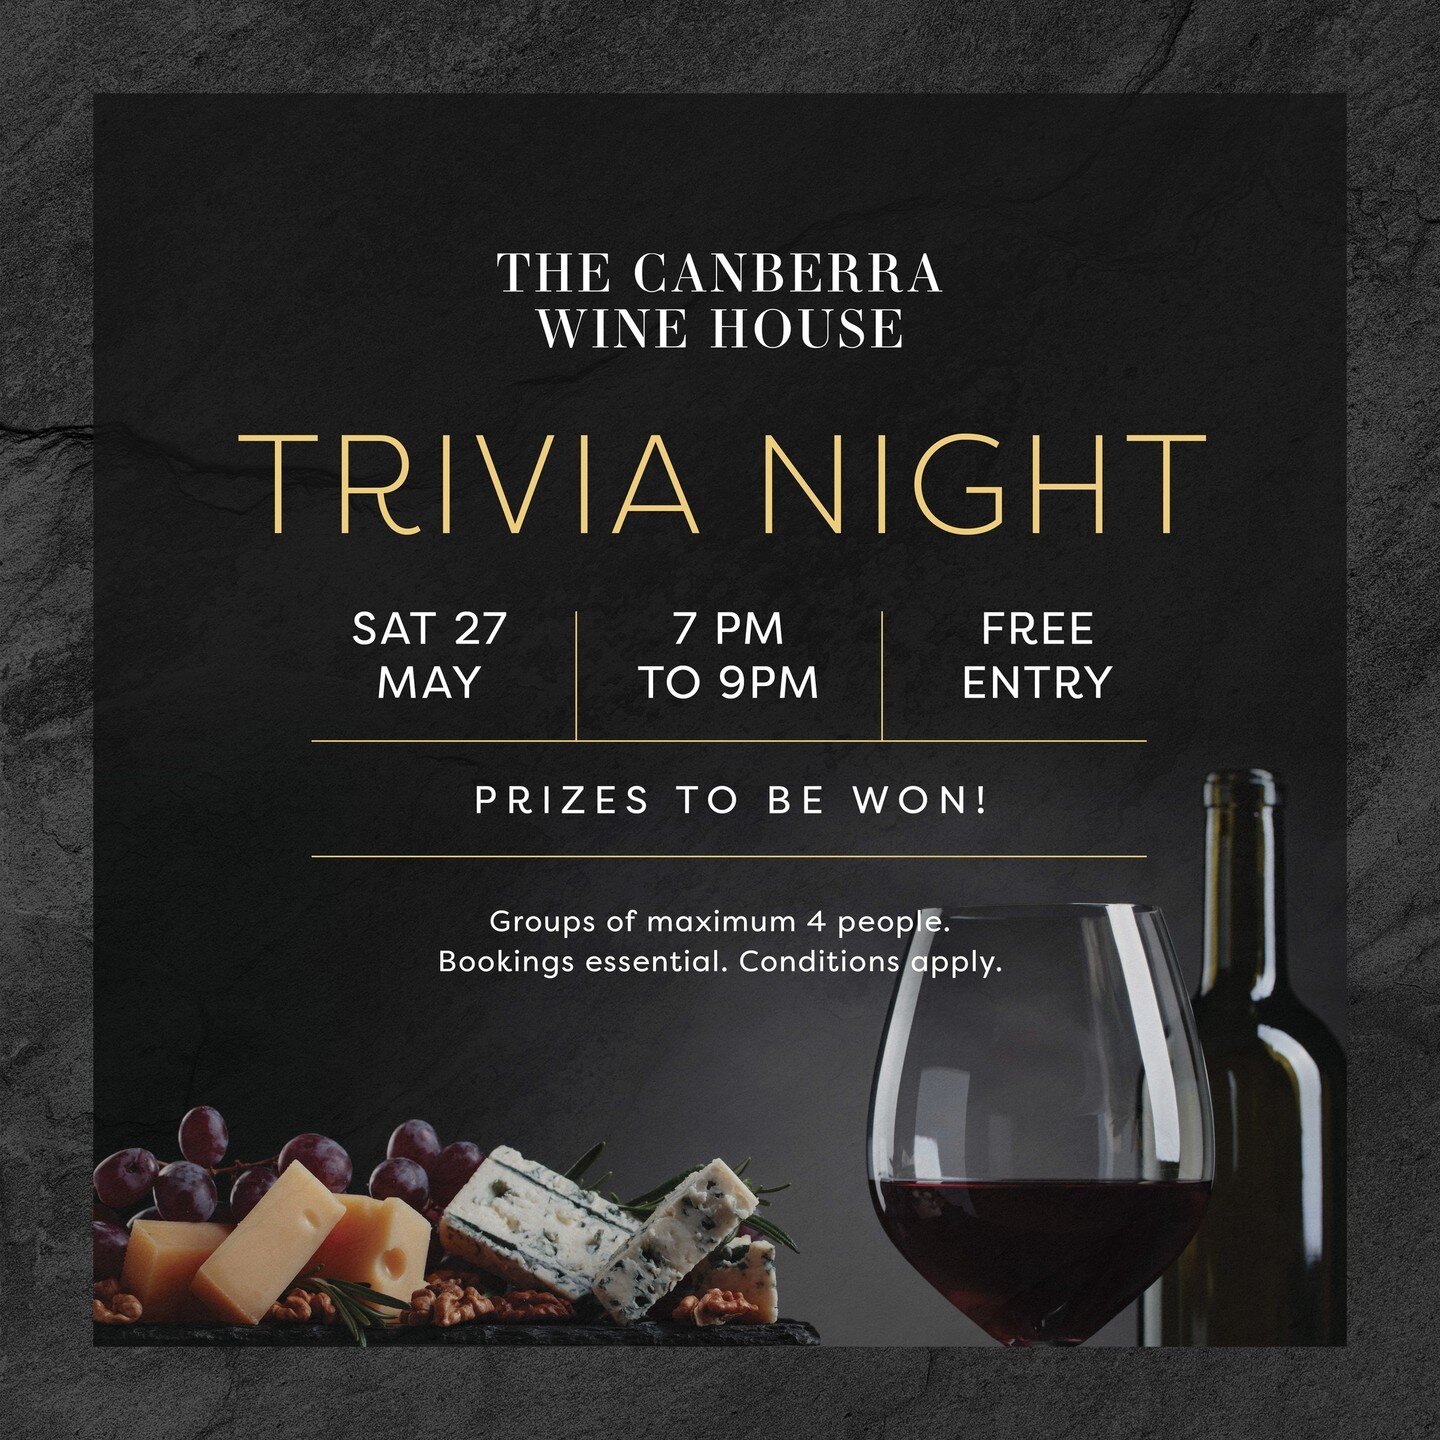 🍷🎉 Get ready for an unforgettable evening of brain-teasing fun and fabulous wine at The Canberra Wine House! 🍷🎉

🎉 Join us on Saturday, 27 May for an EPIC Trivia Night that will blow your mind! 🎉

🧠💡 Put on your thinking caps and gather your 